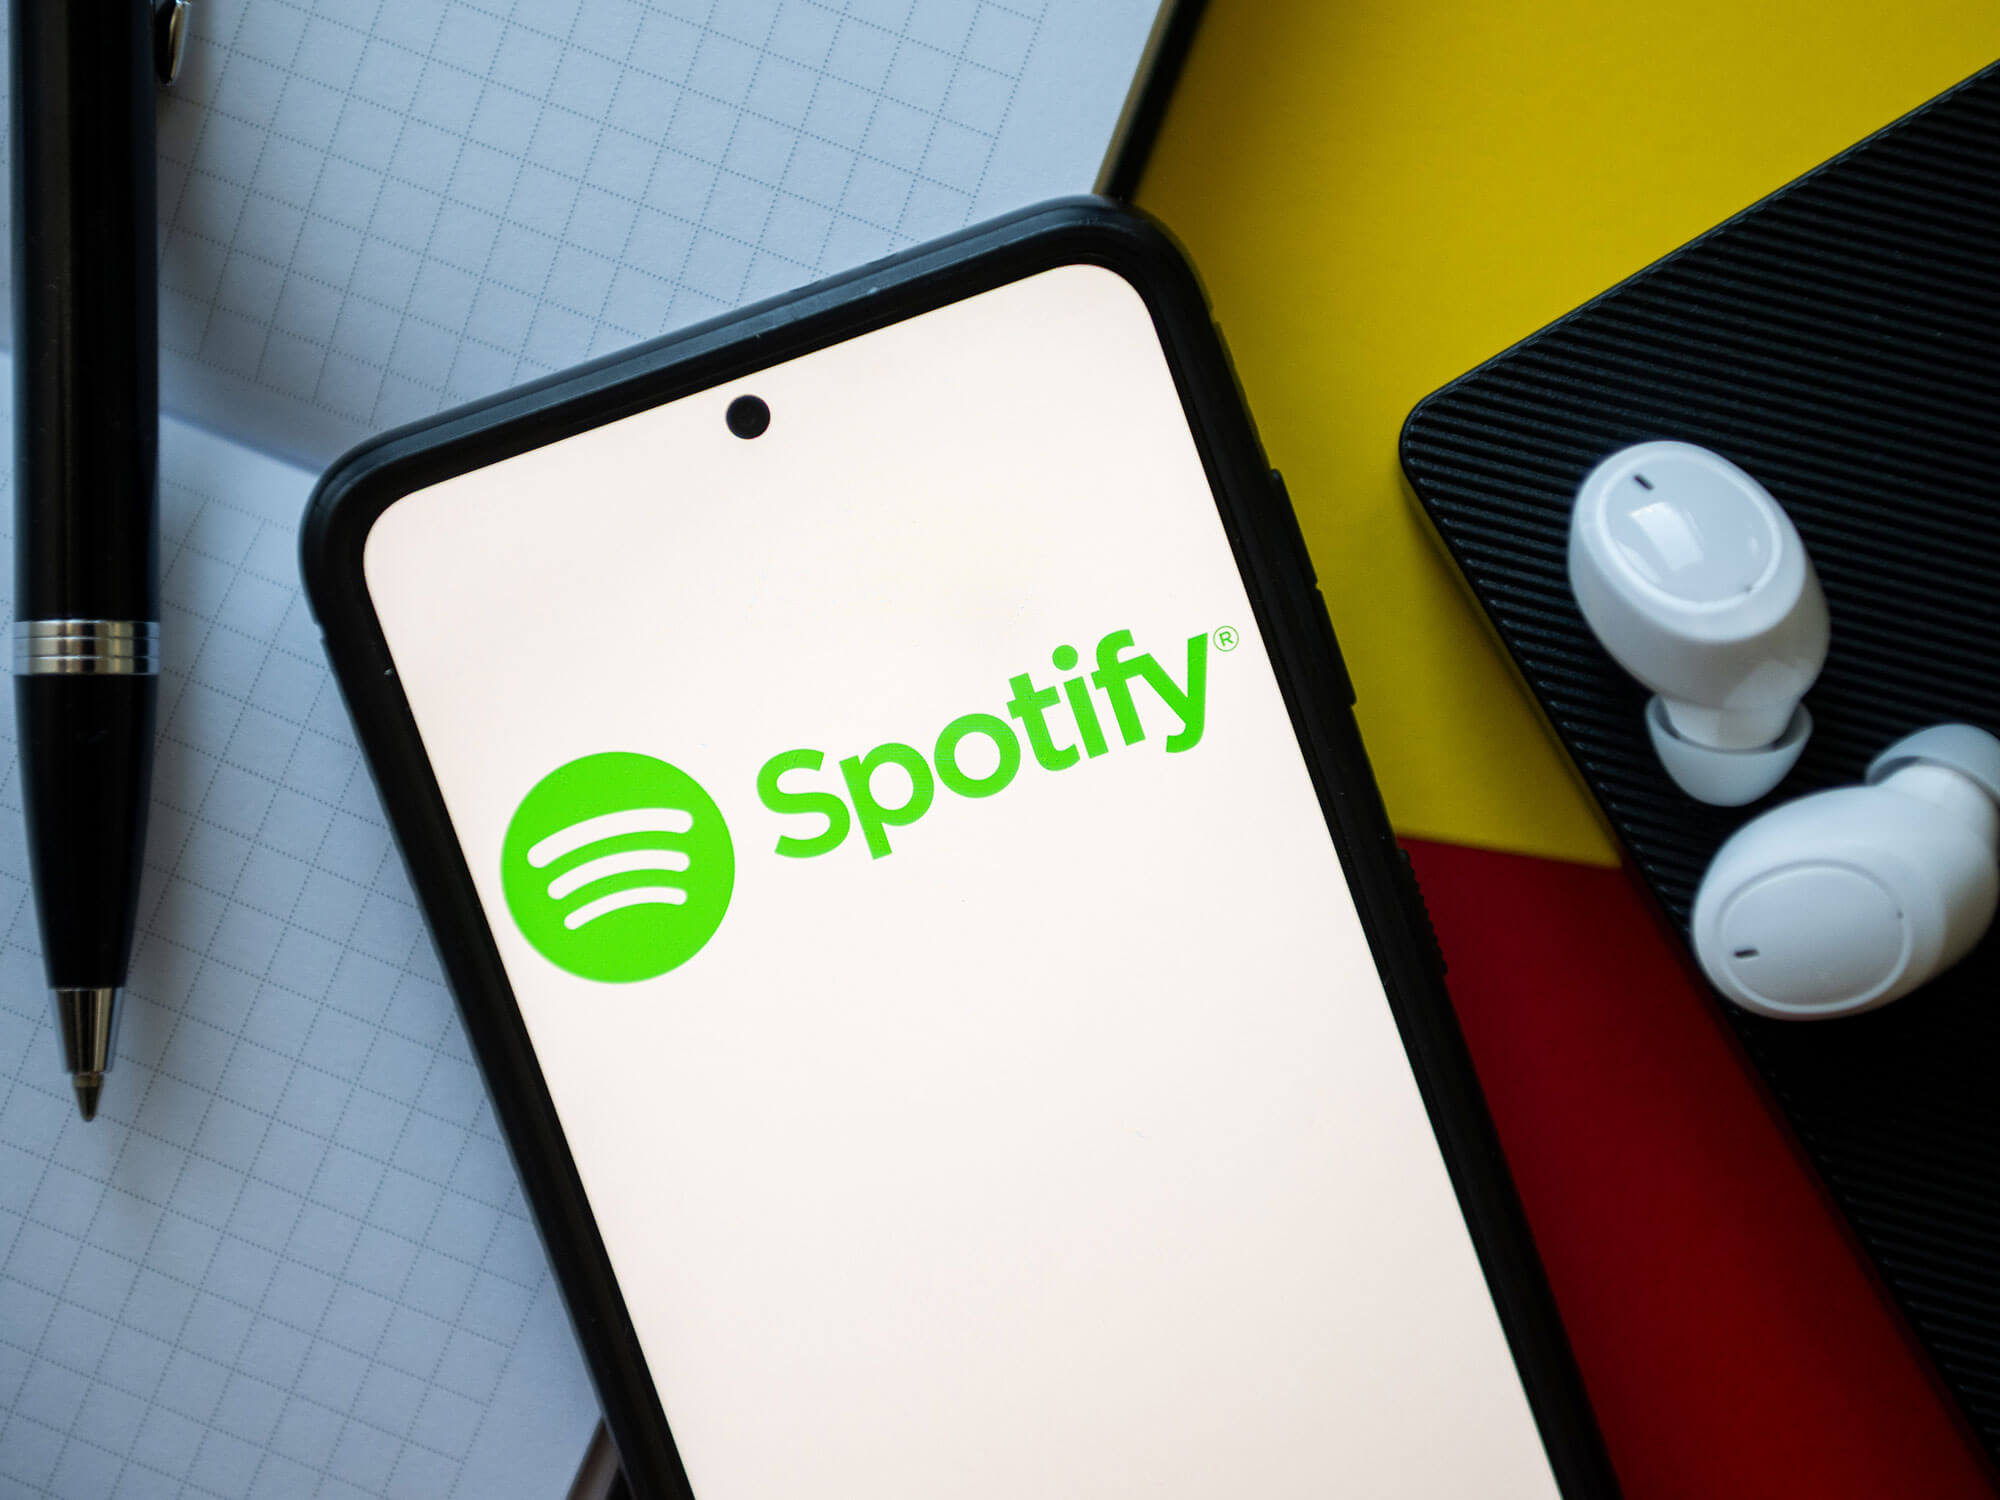 Spotify logo on a phone, sitting on a desk with headphones and a pen